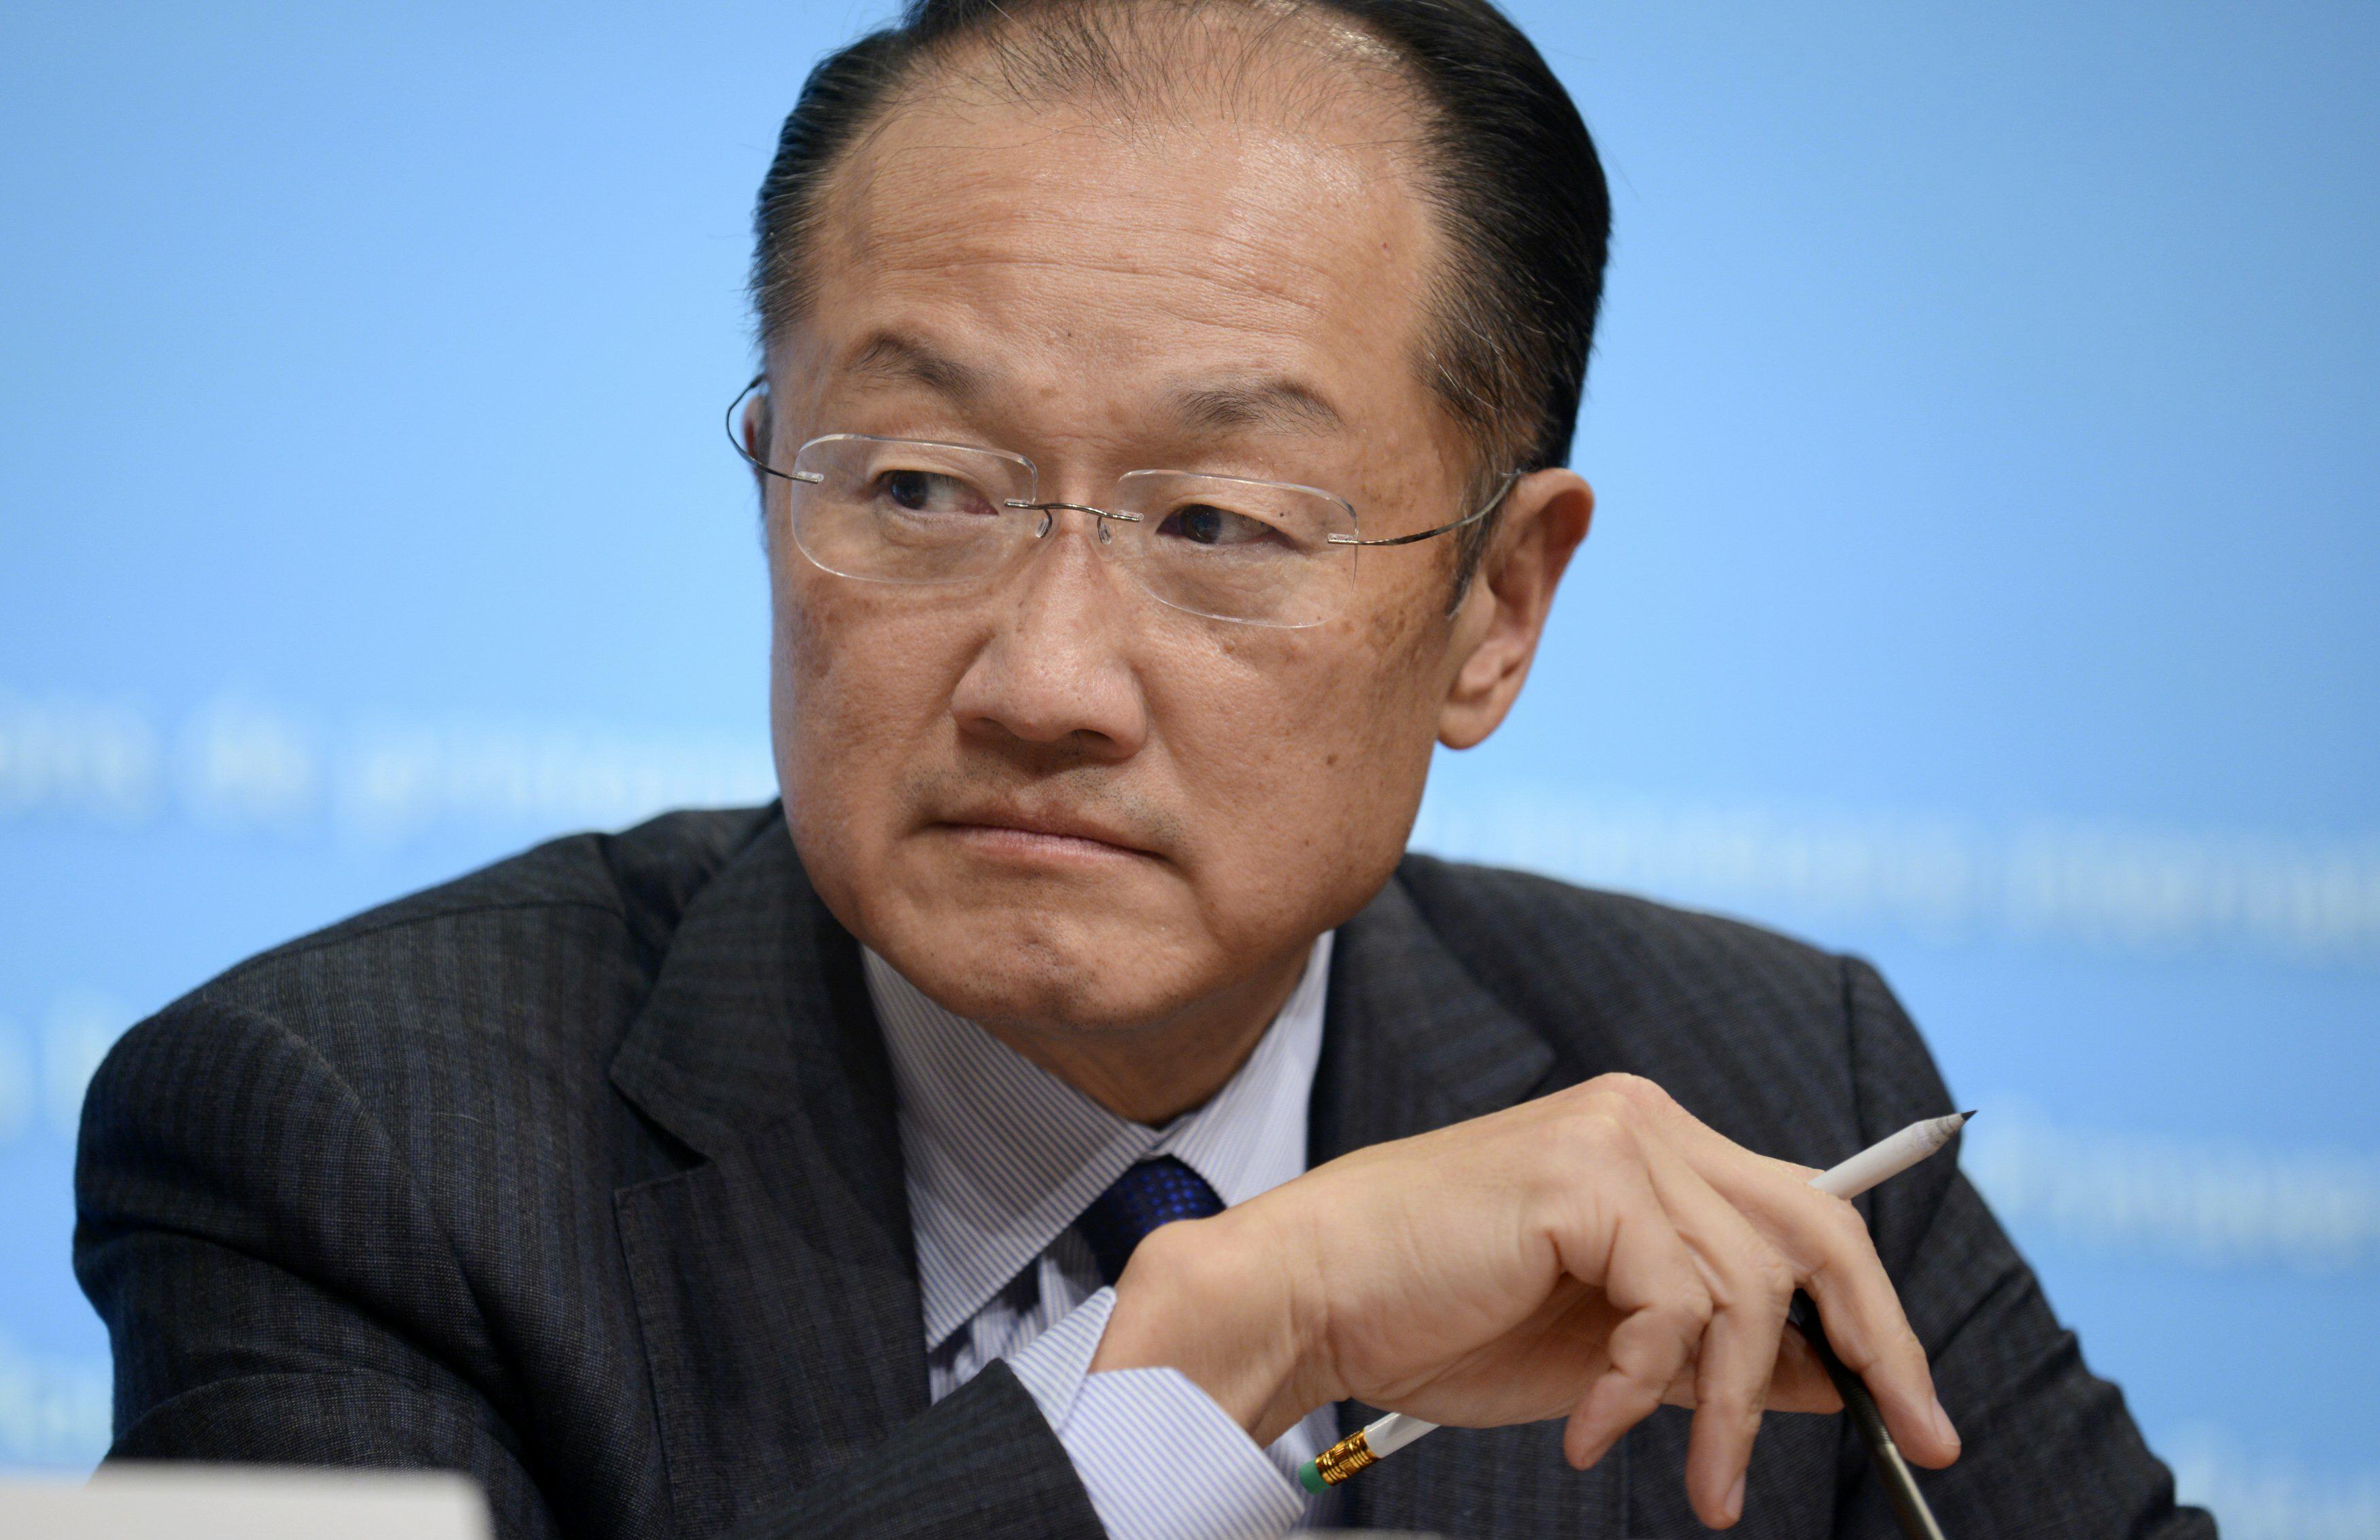 World Bank launches $500 million insurance fund to fight pandemics